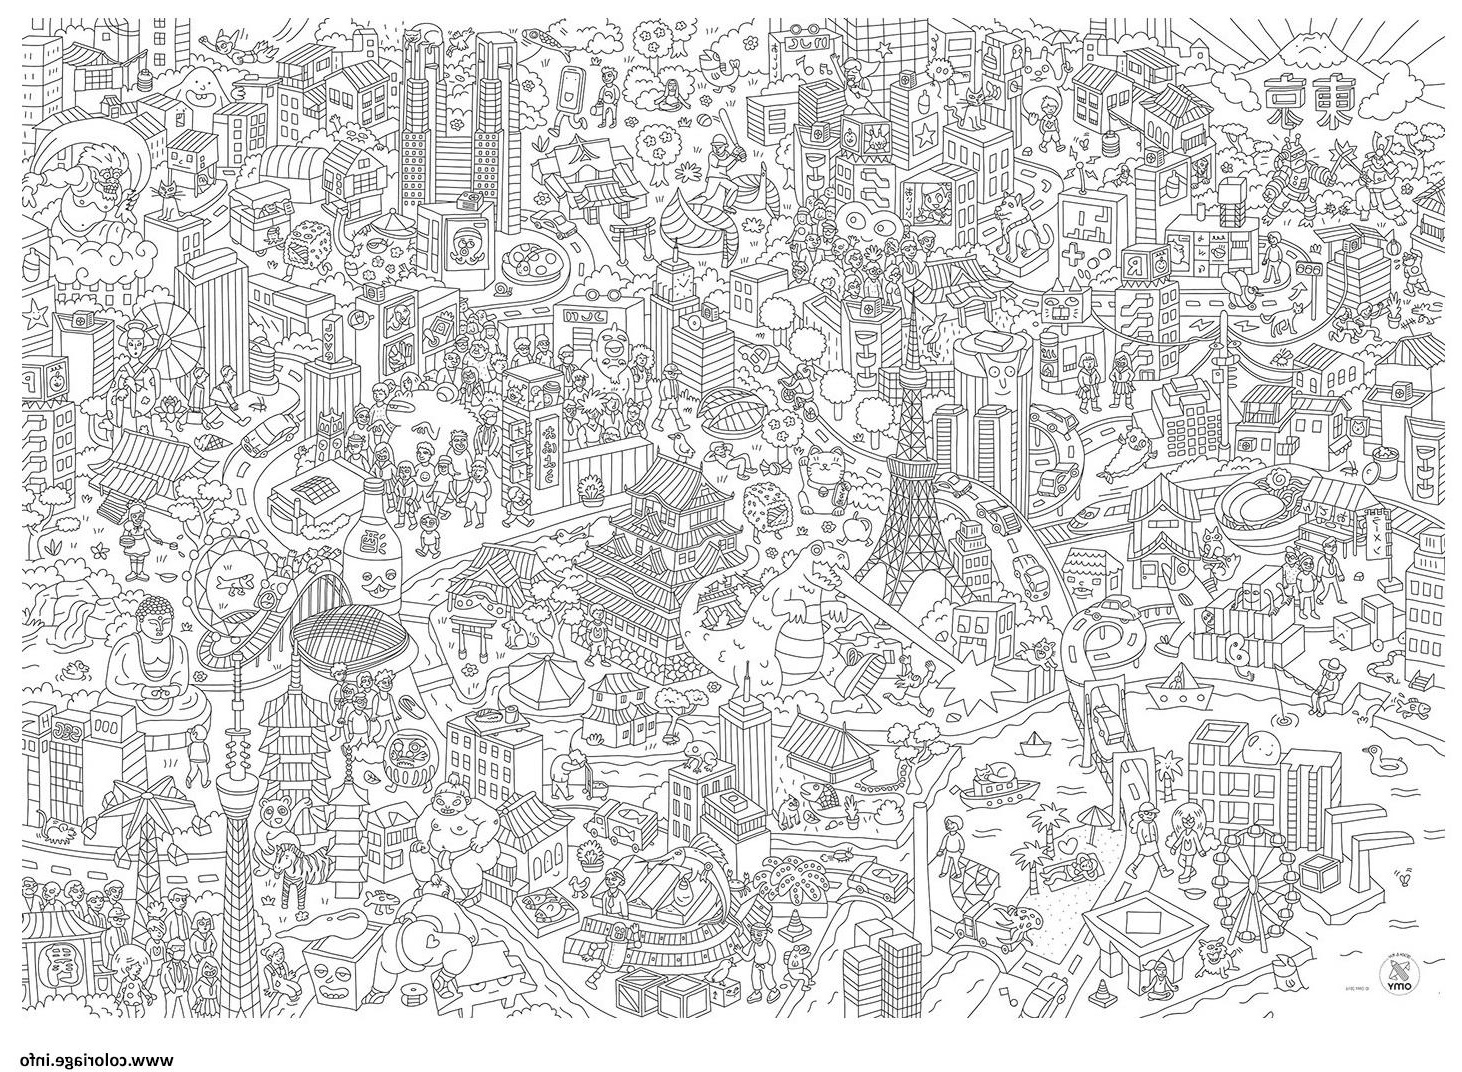 xxl omy grand poster a colorier tokyo coloriage